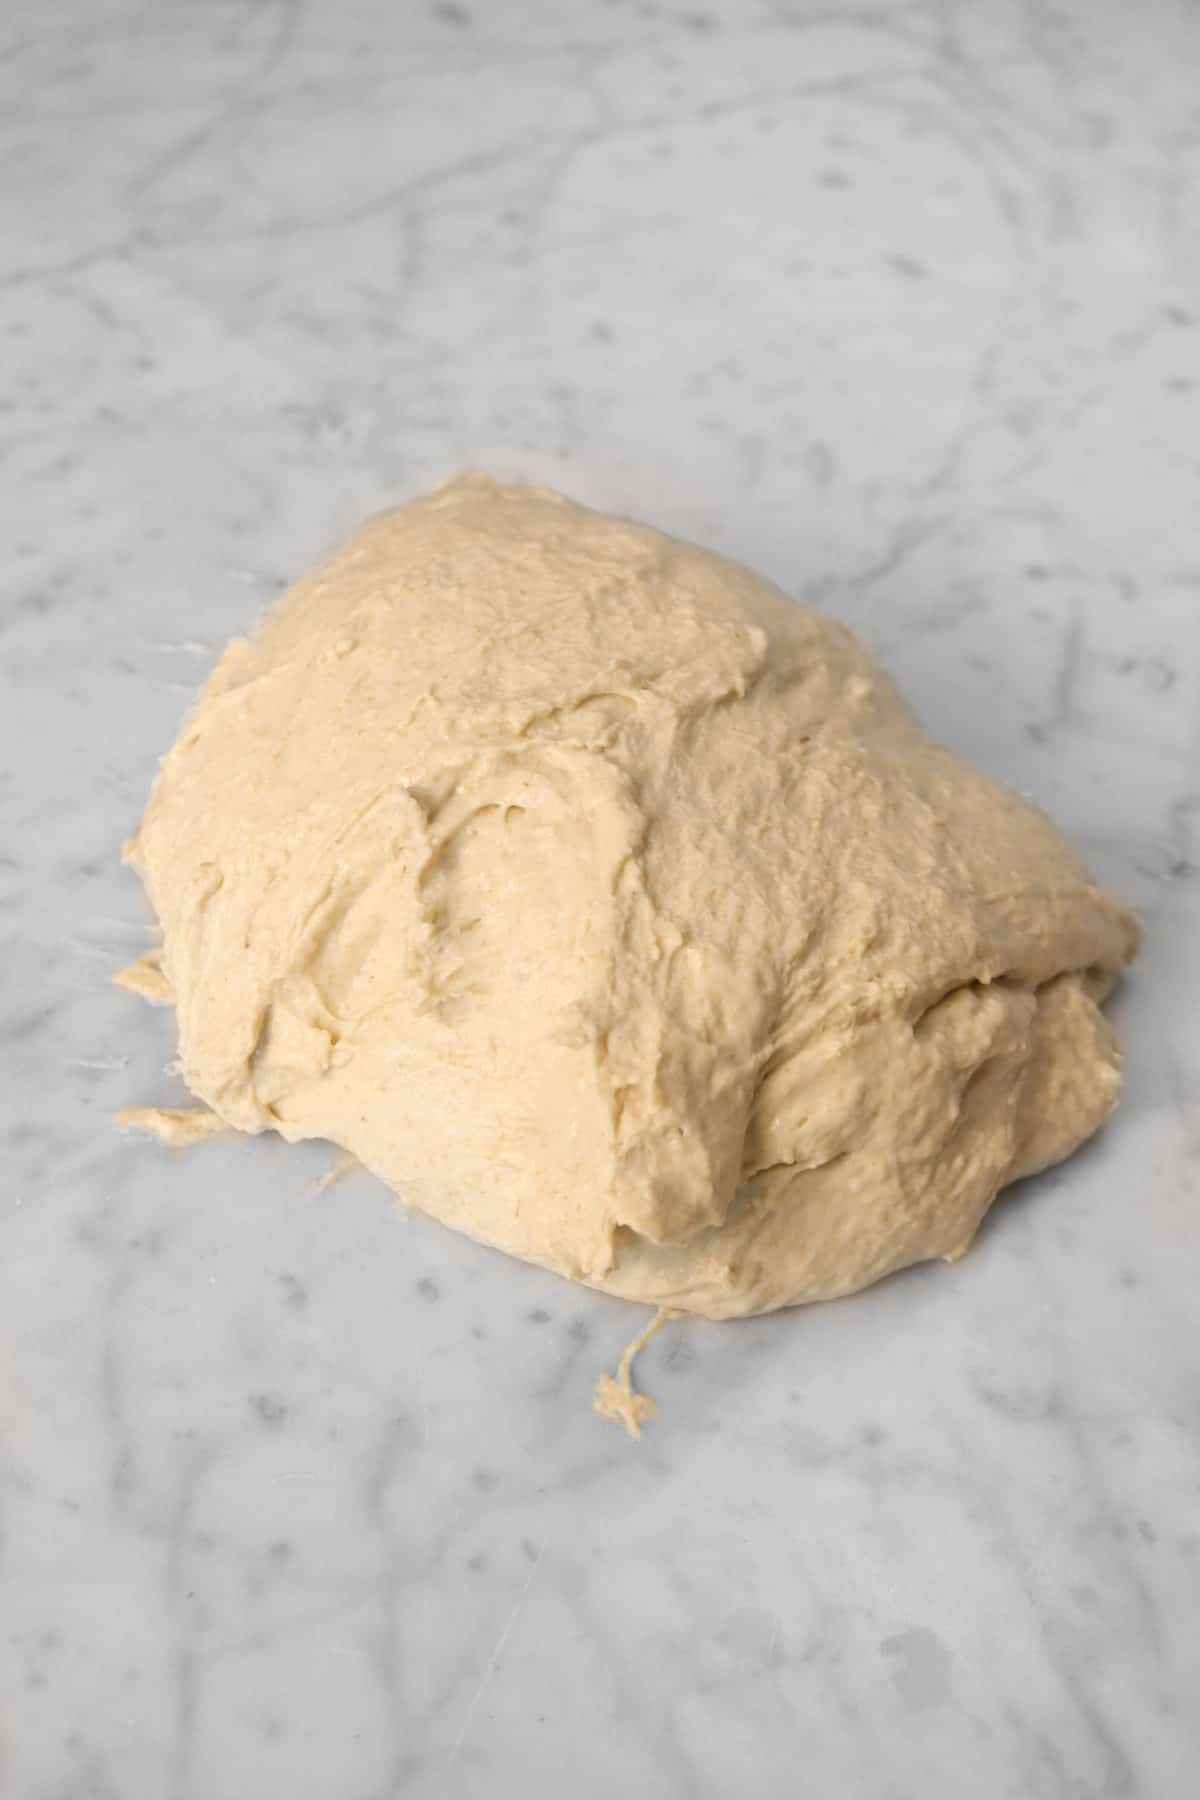 dough folded over to the left in half